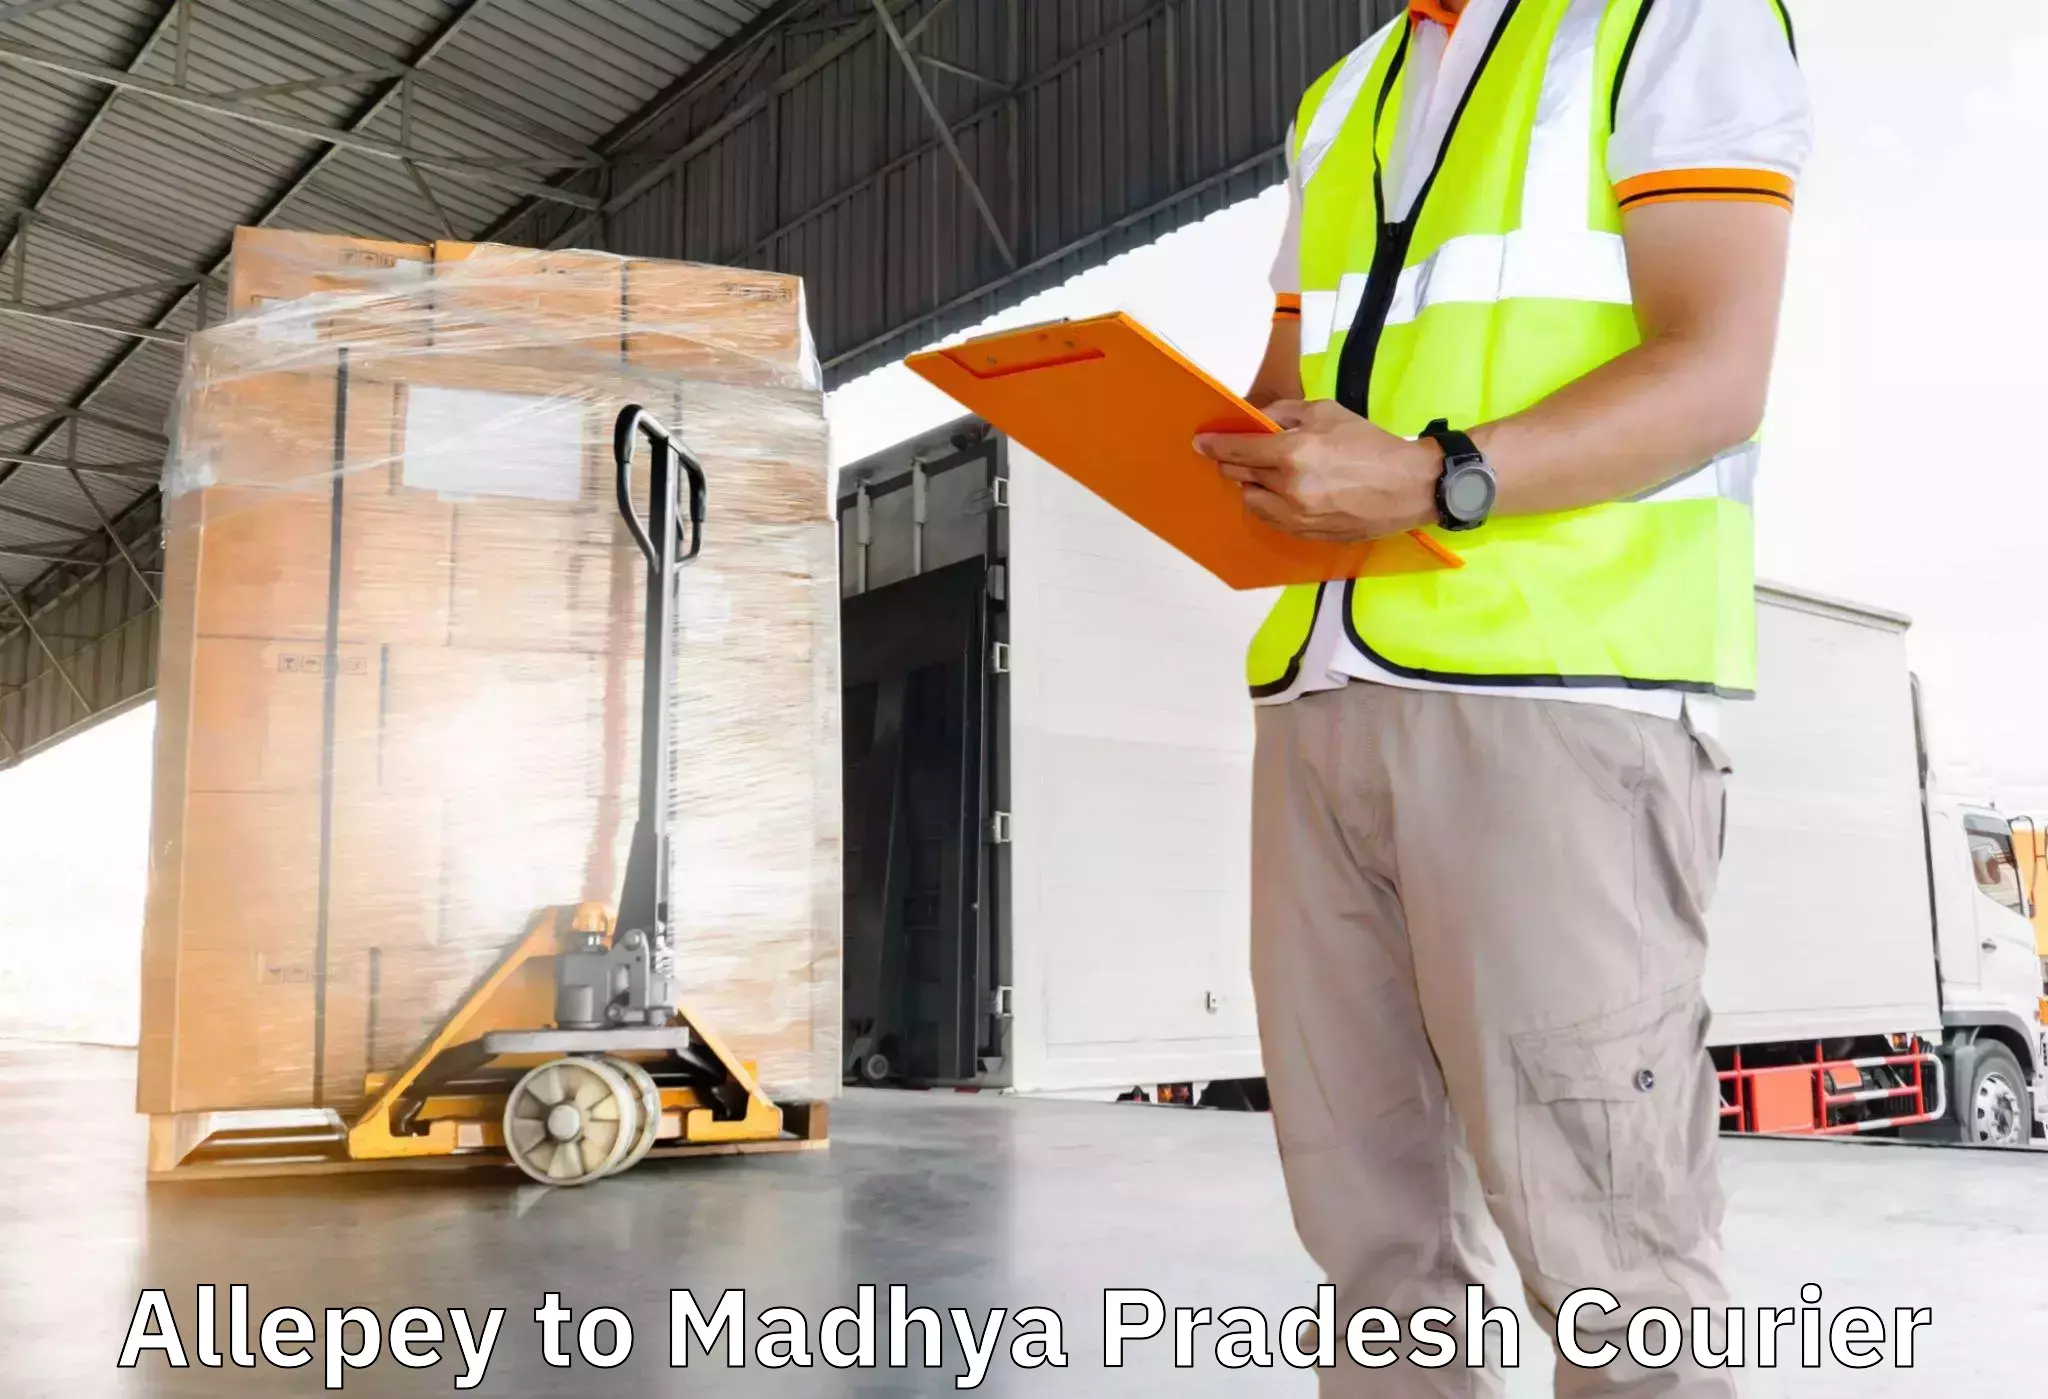 Furniture moving specialists Allepey to Madhya Pradesh